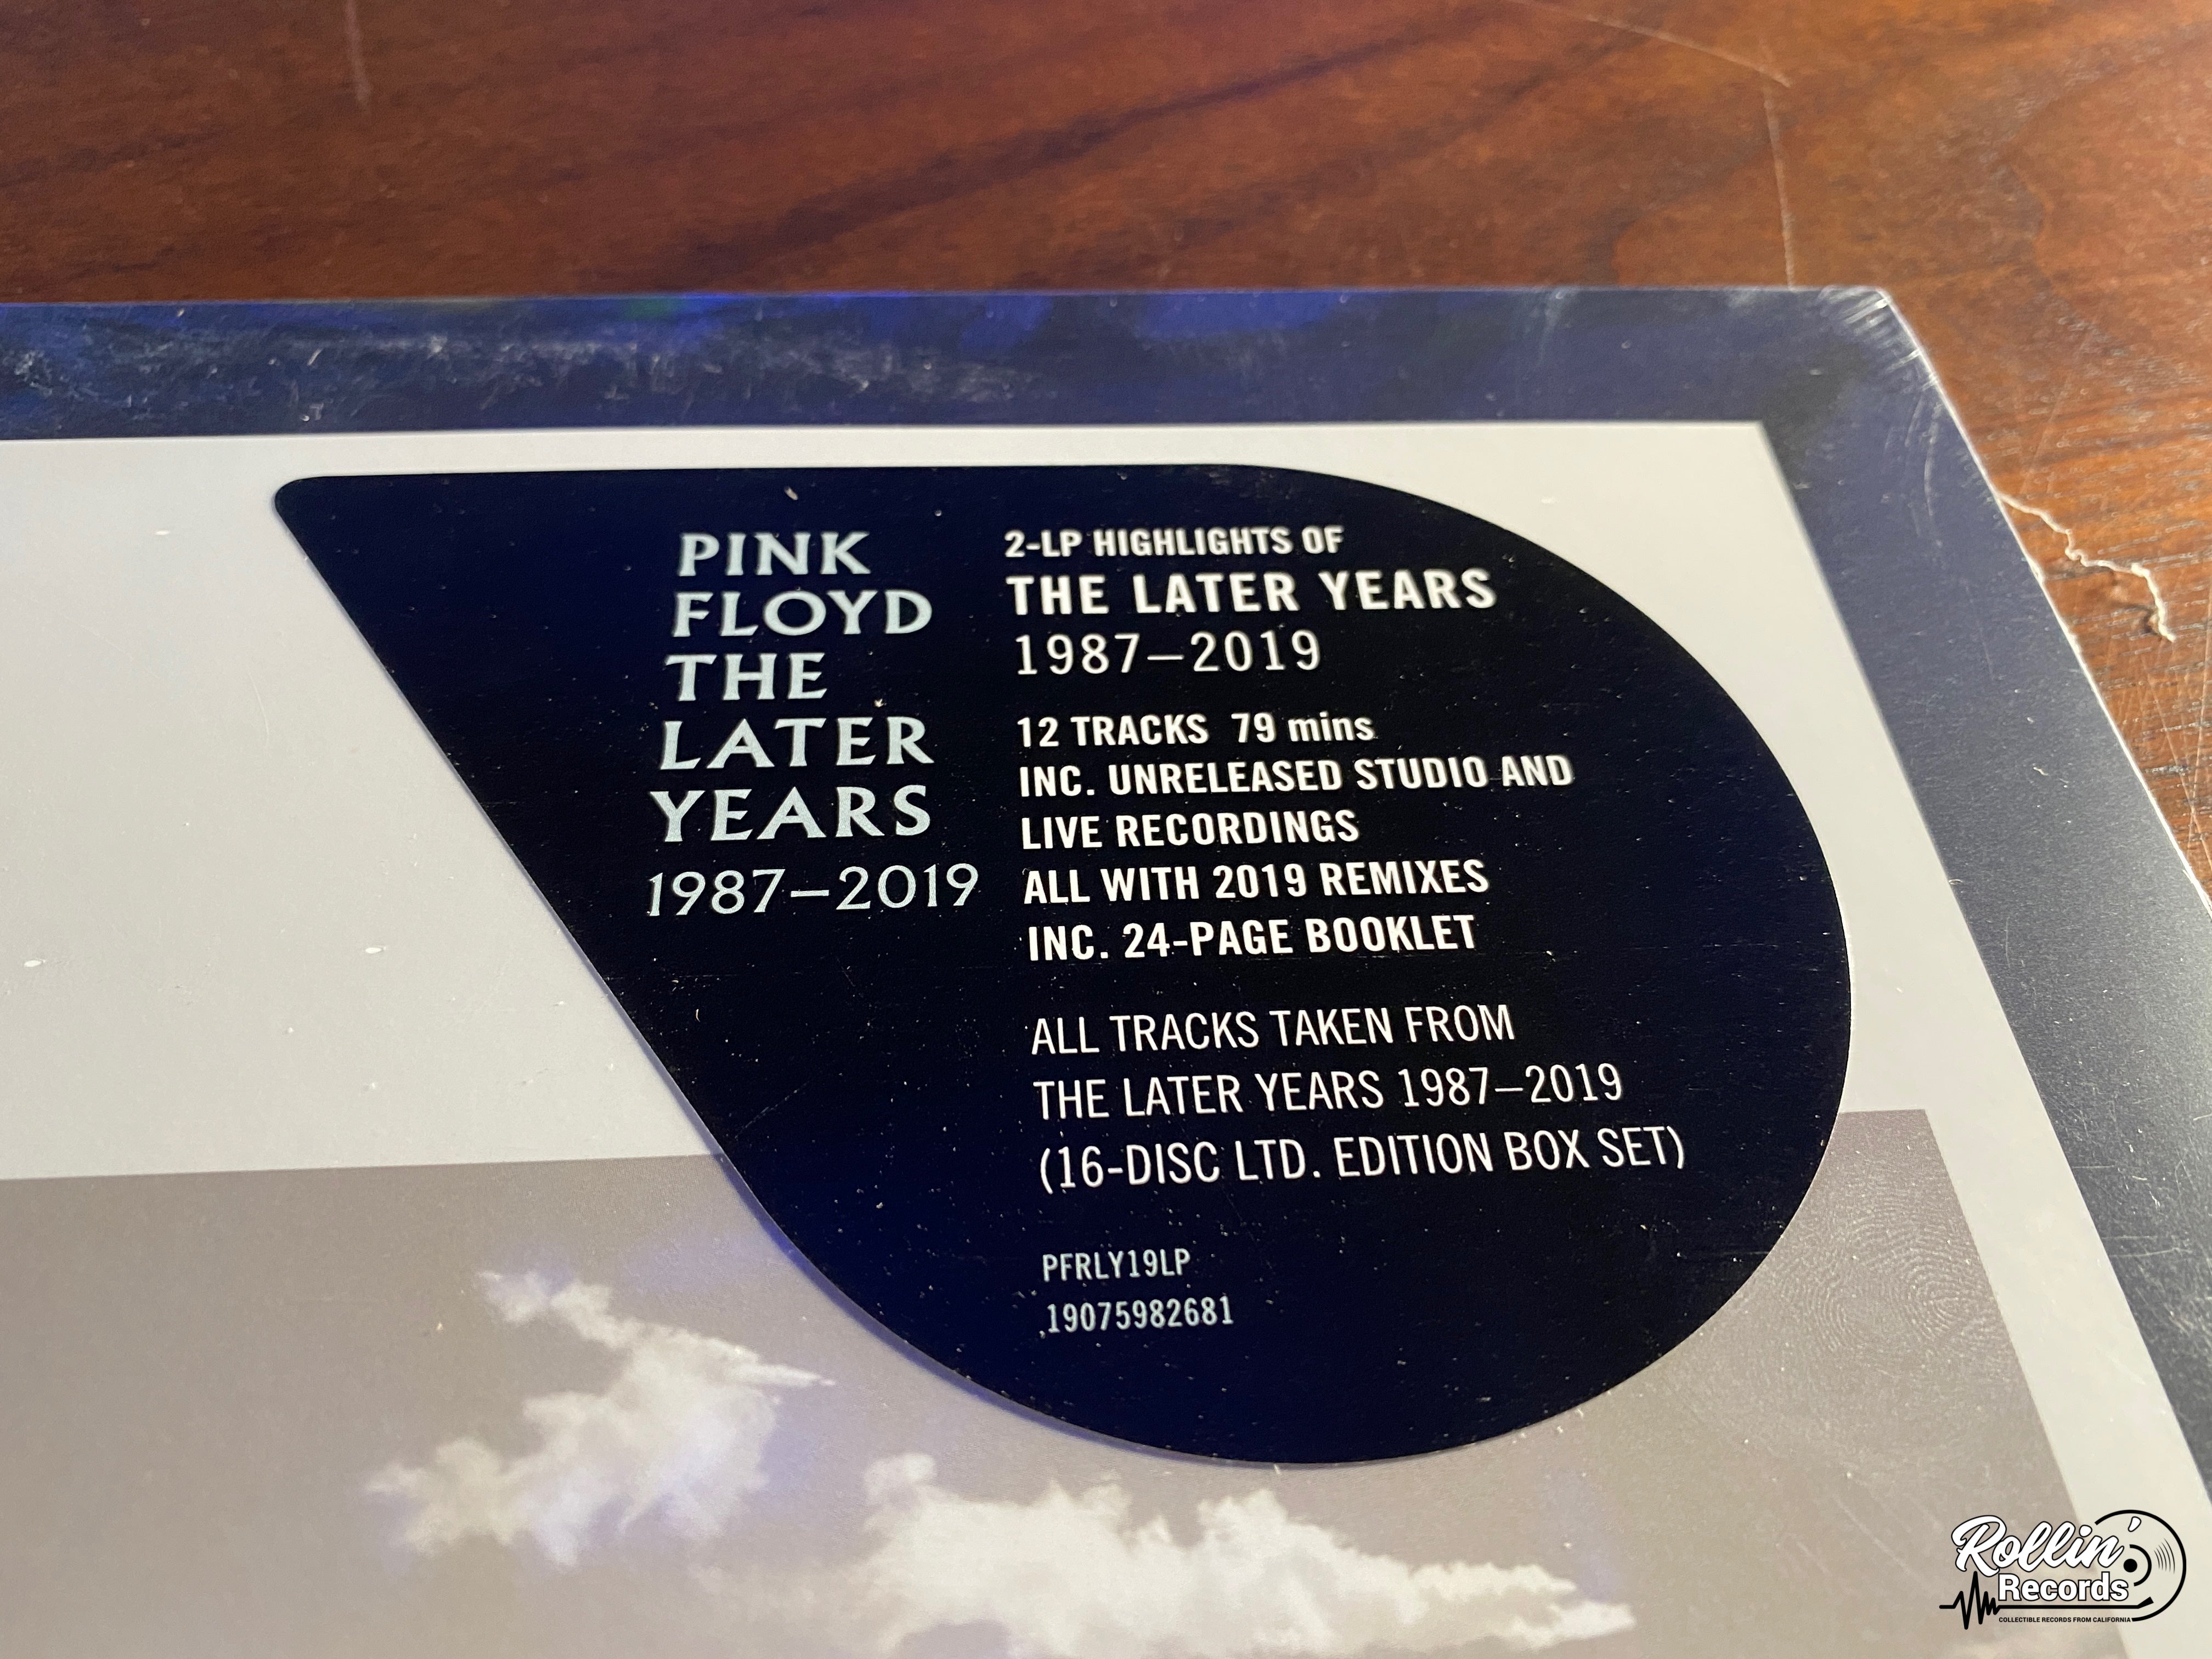 Pink Floyd - The Later Years (1987-2019) Highlights – Rollin' Records